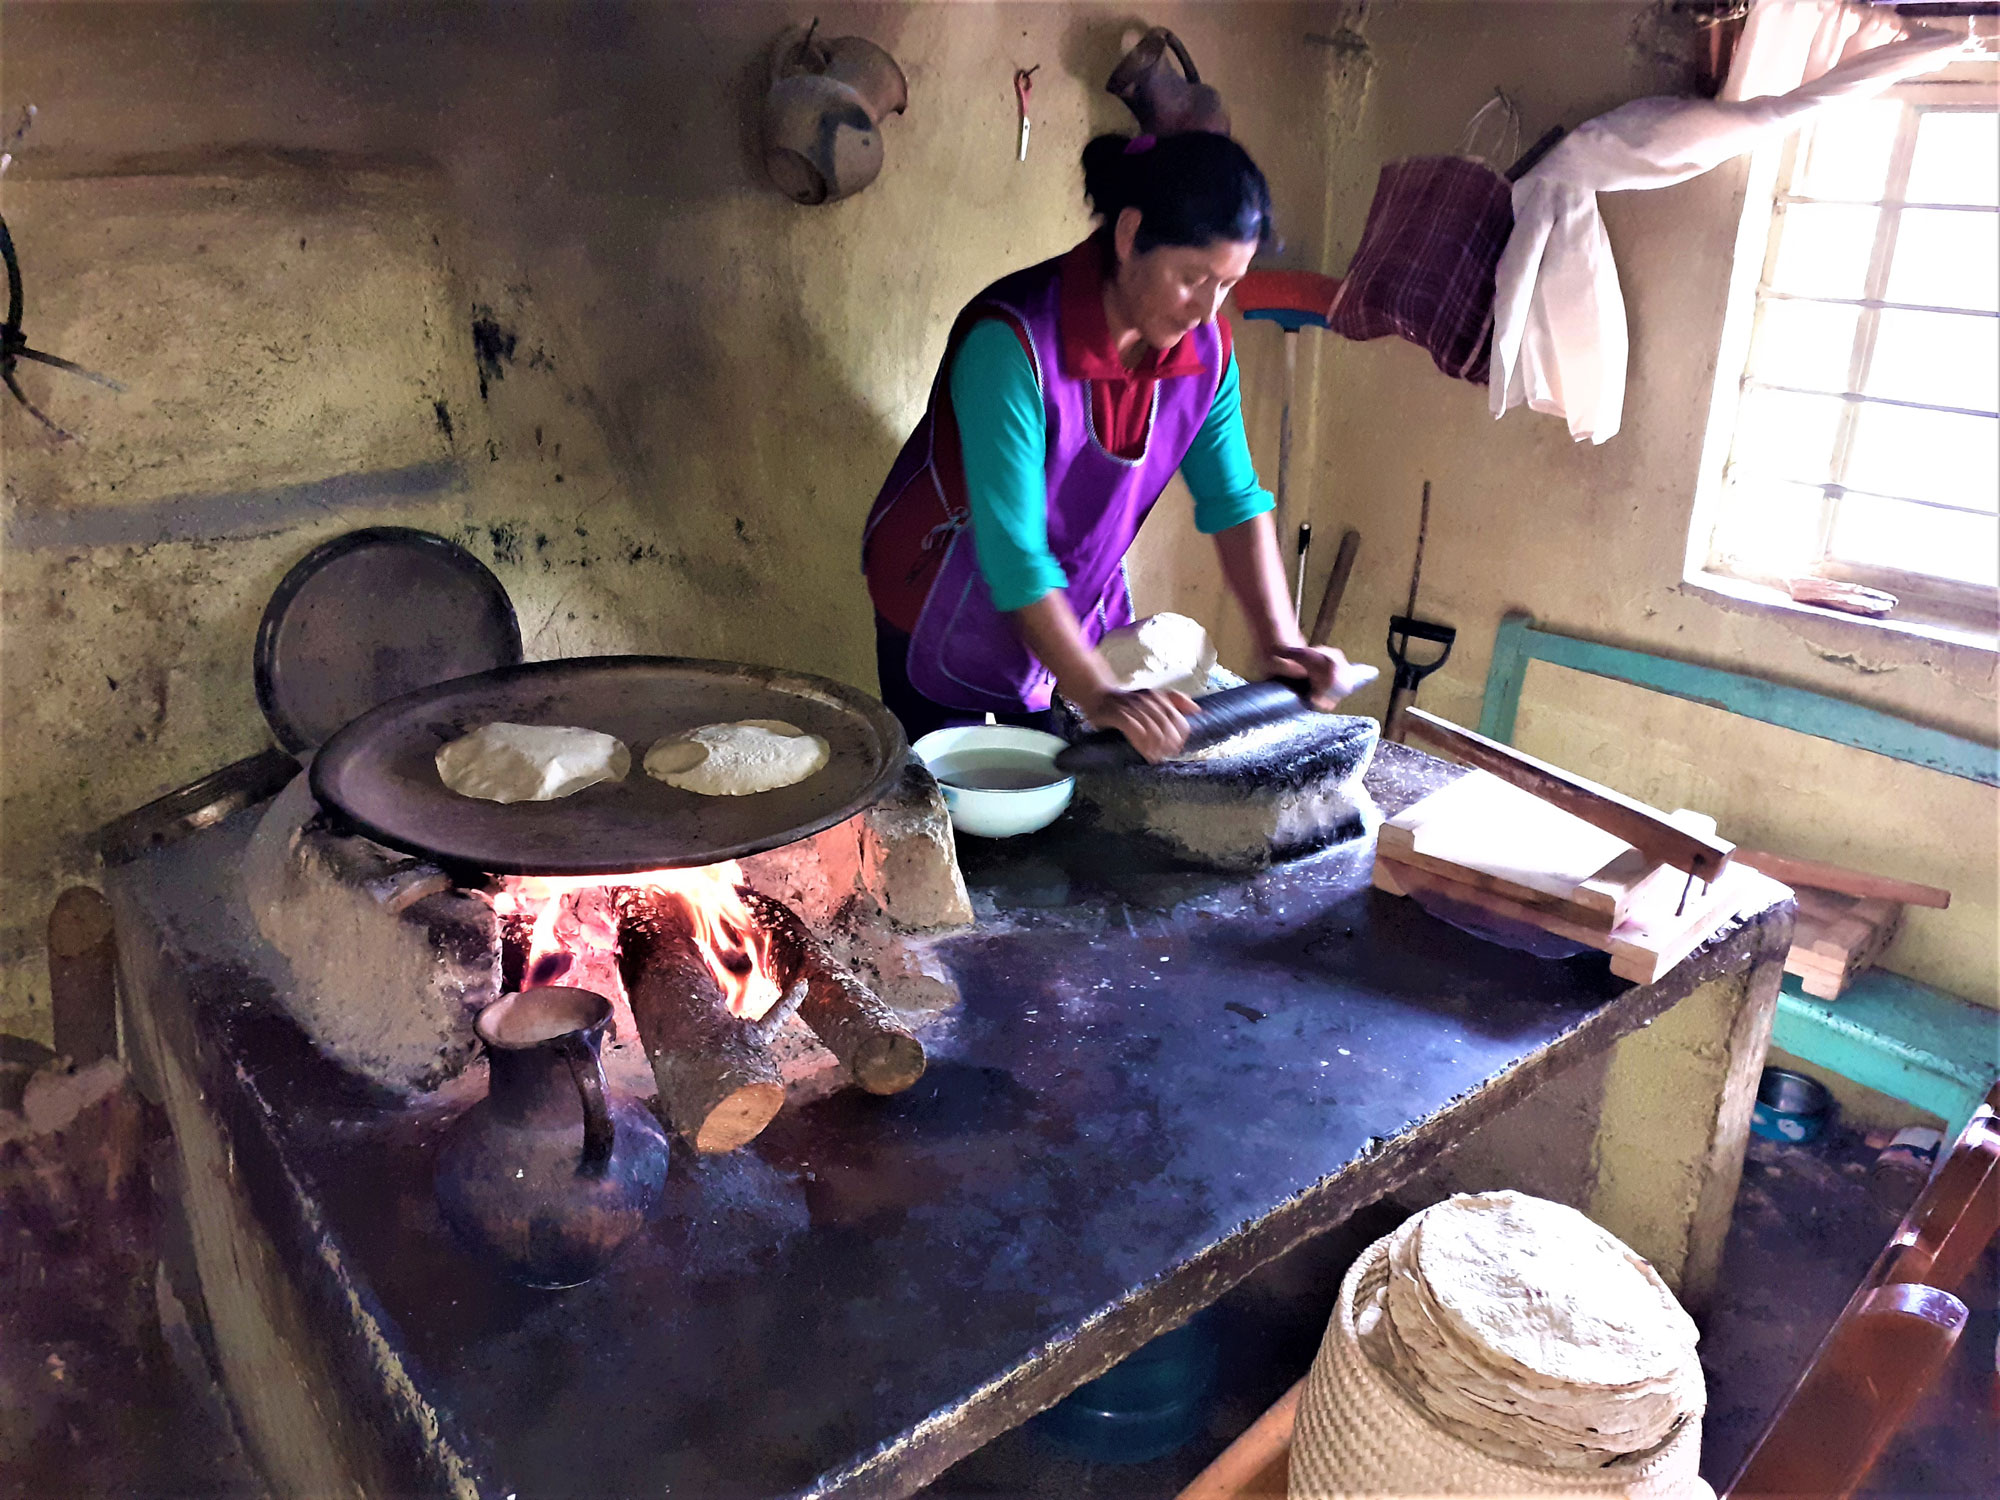 Photograph of a woman preparing tortillas in Oaxaca Mexico. The photo shows a woman using a metate and mano to grind maize and make masa. Next to her is a flat metal sheet sitting a a fire. Two circular tortillas are cooking on the sheet. In from of the table where the woman is working, a basket holds a stack of finished tortillas.